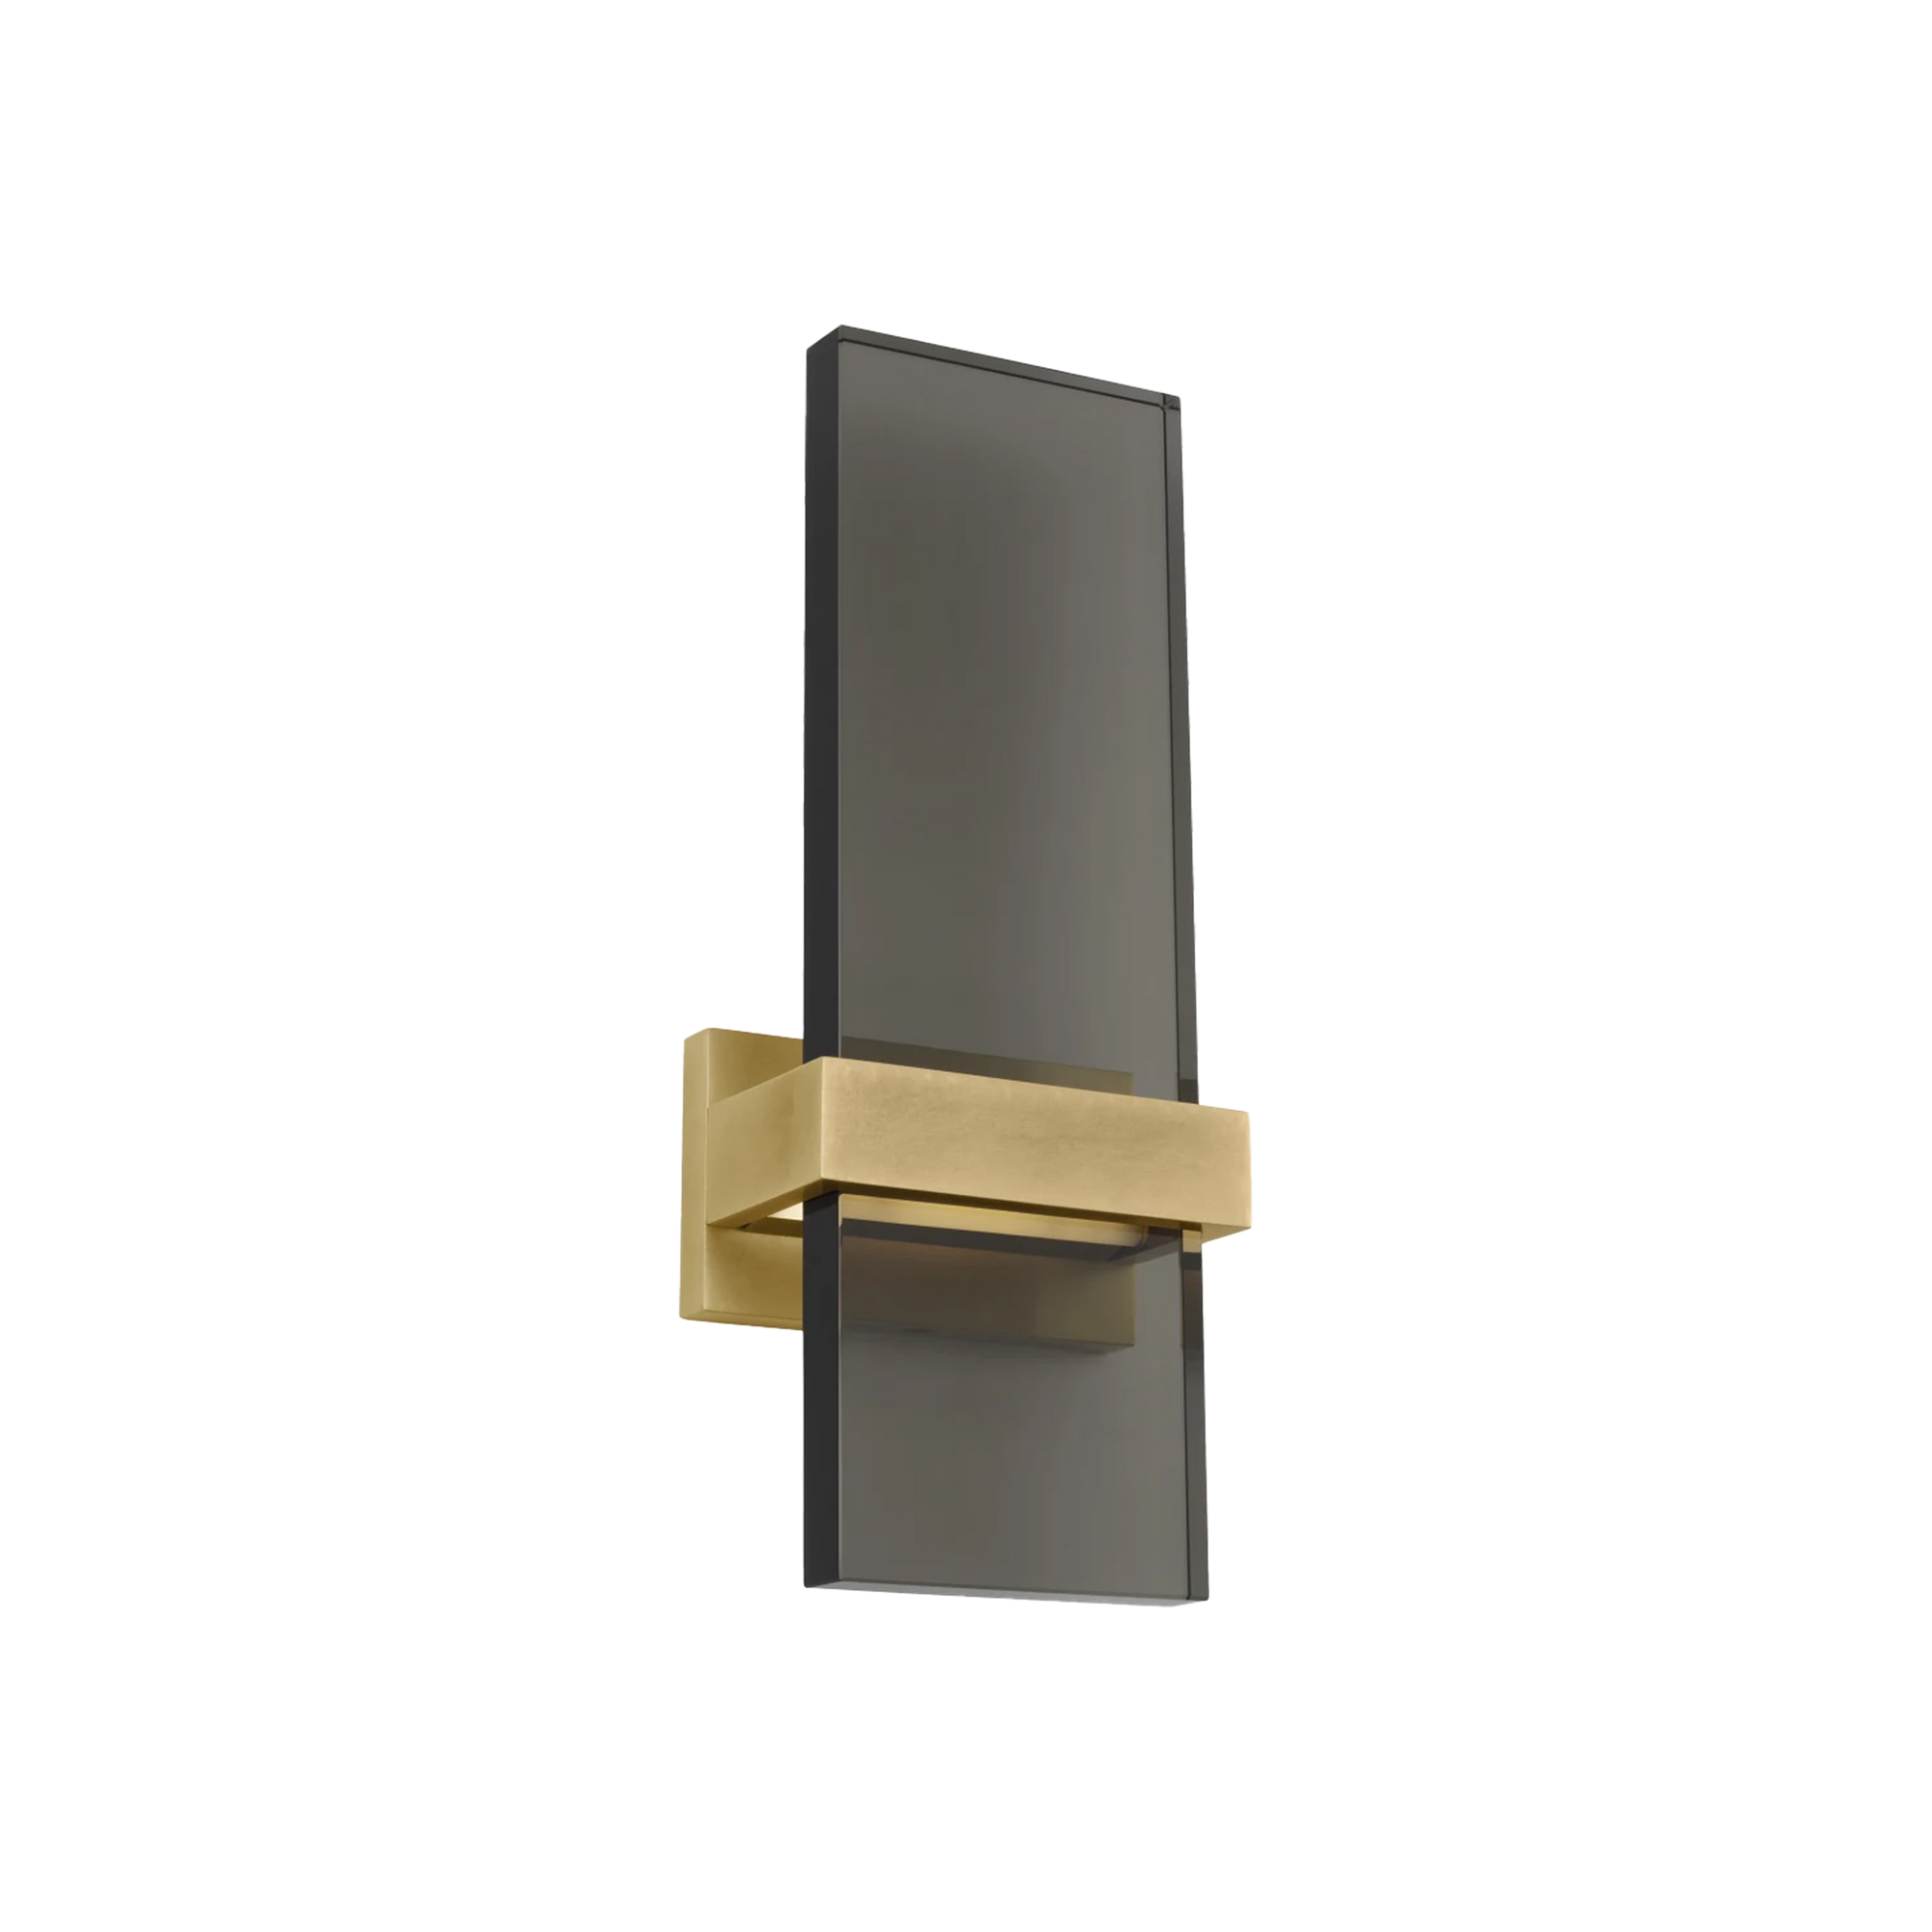 Brilliant glass meets luxe metal in the Flyta Small LED Sconce.